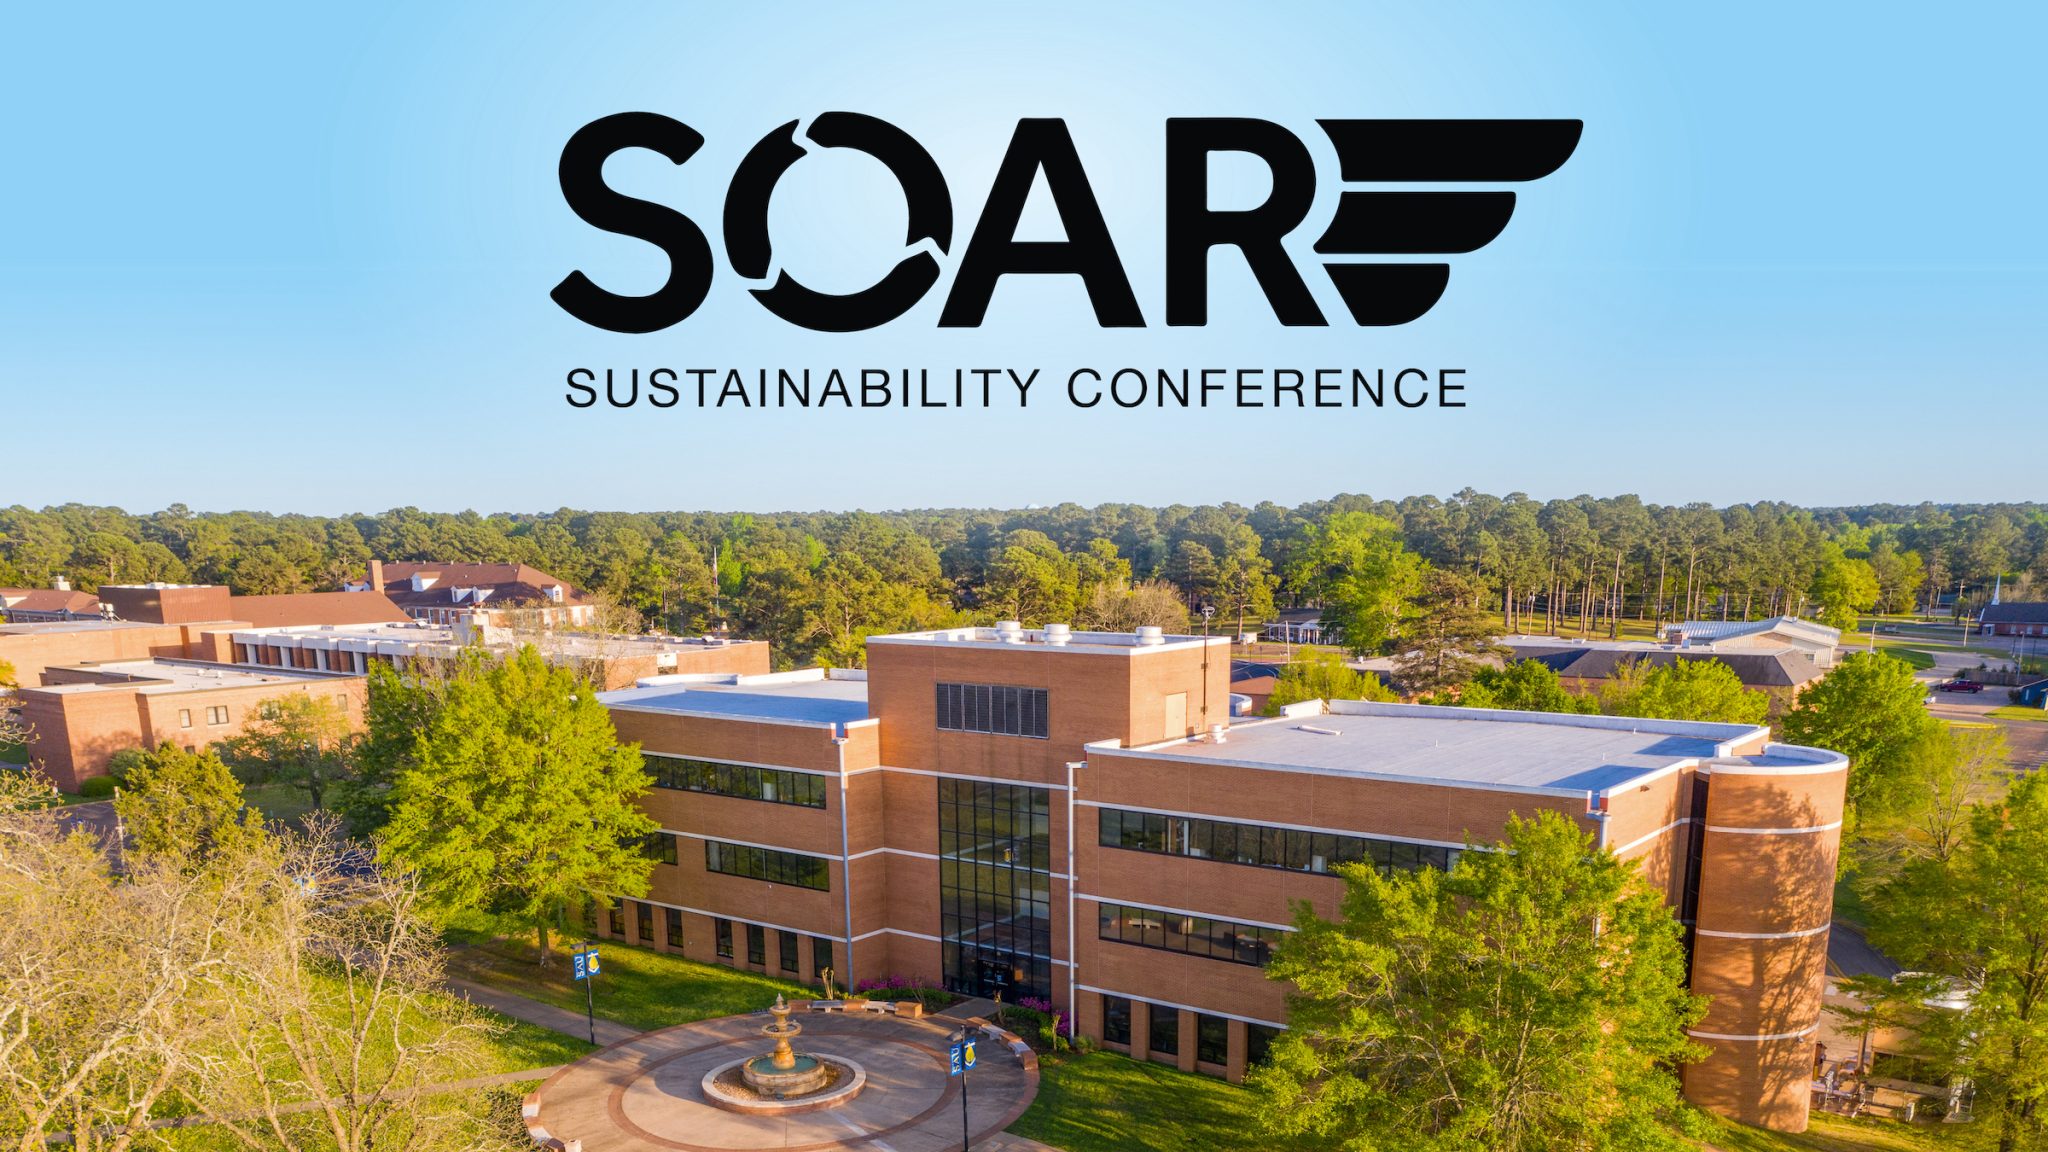 SOAR conference to focus on sustainability News Southern Arkansas